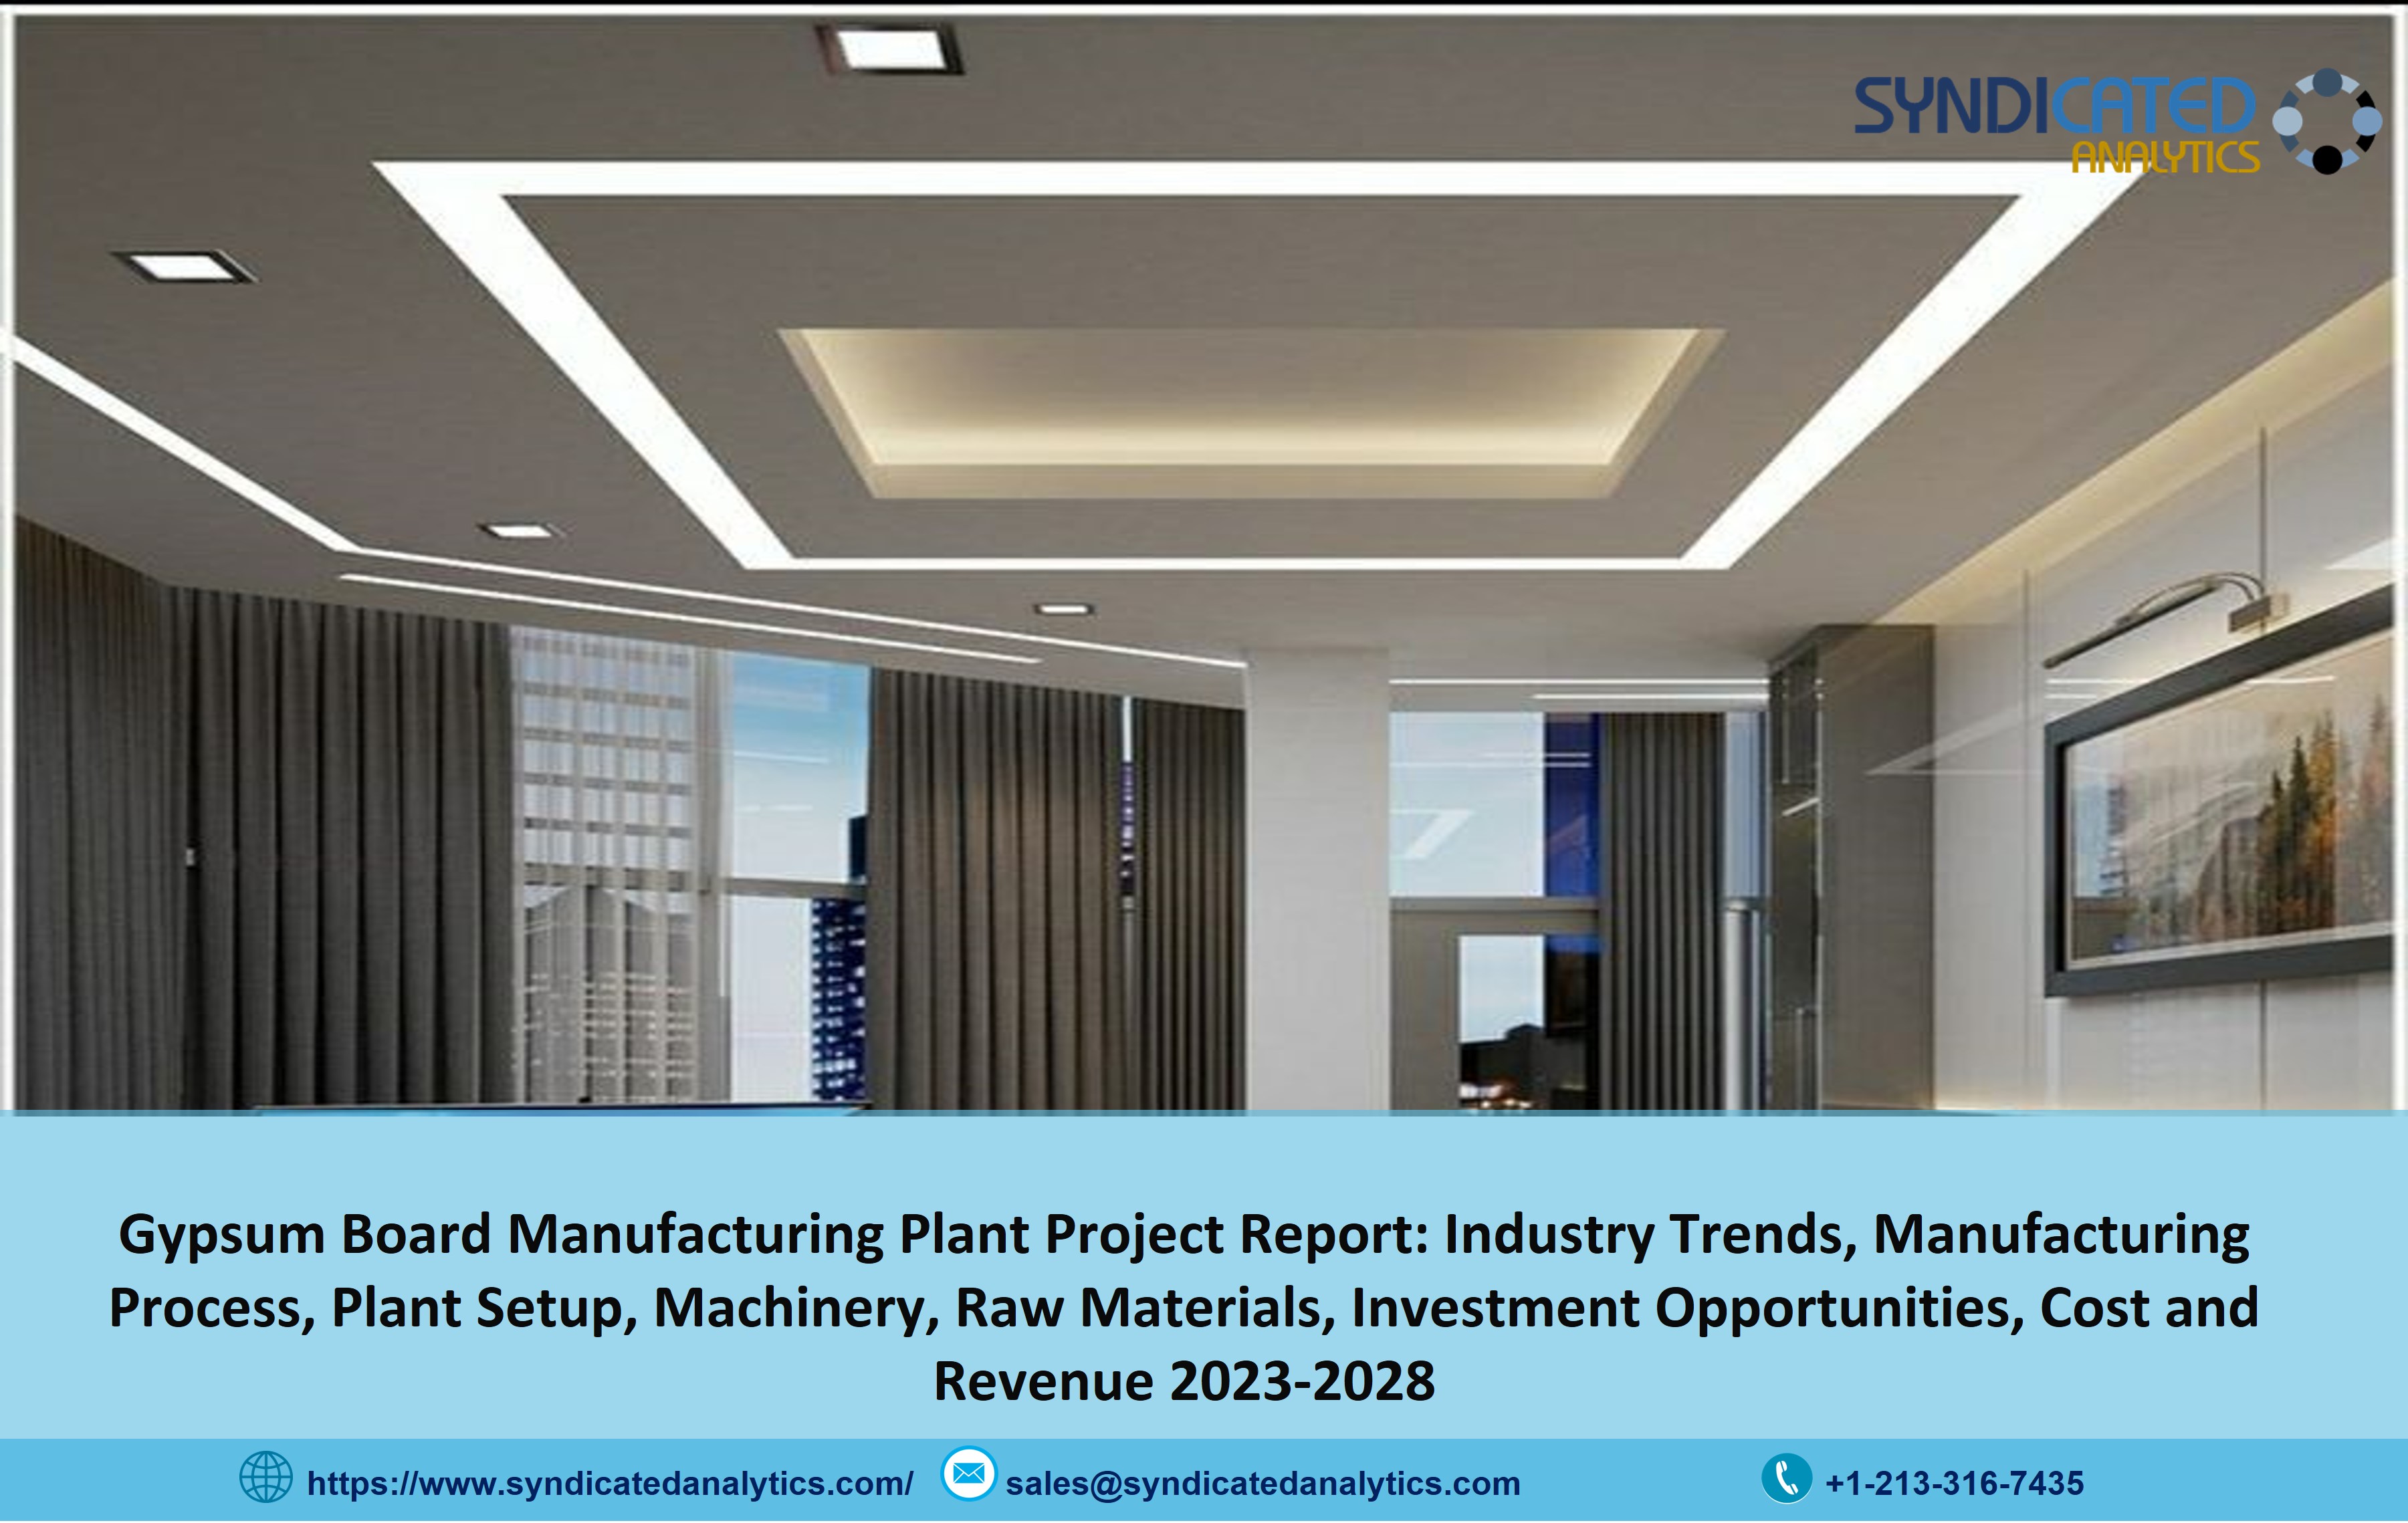 Setting Up a Successful Gypsum Boards Manufacturing Plant 2023-2028 | Syndicated Analytics